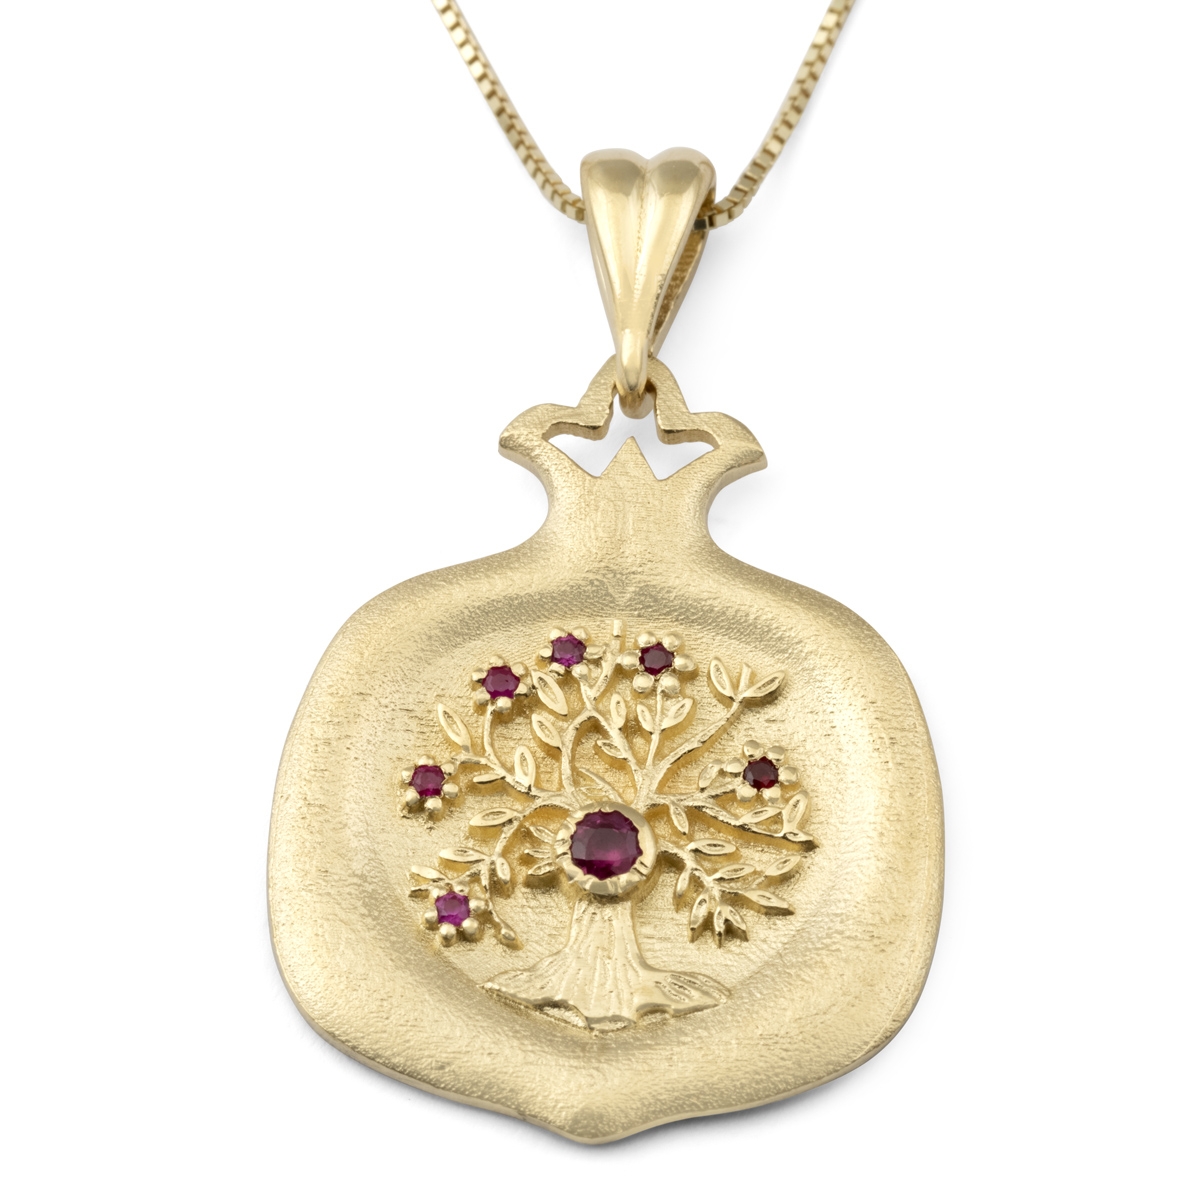 Luxurious 14K Yellow Gold Pomegranate Pendant Necklace With Ruby-Accented  Tree of Life Design, Jewelry | Judaica Webstore